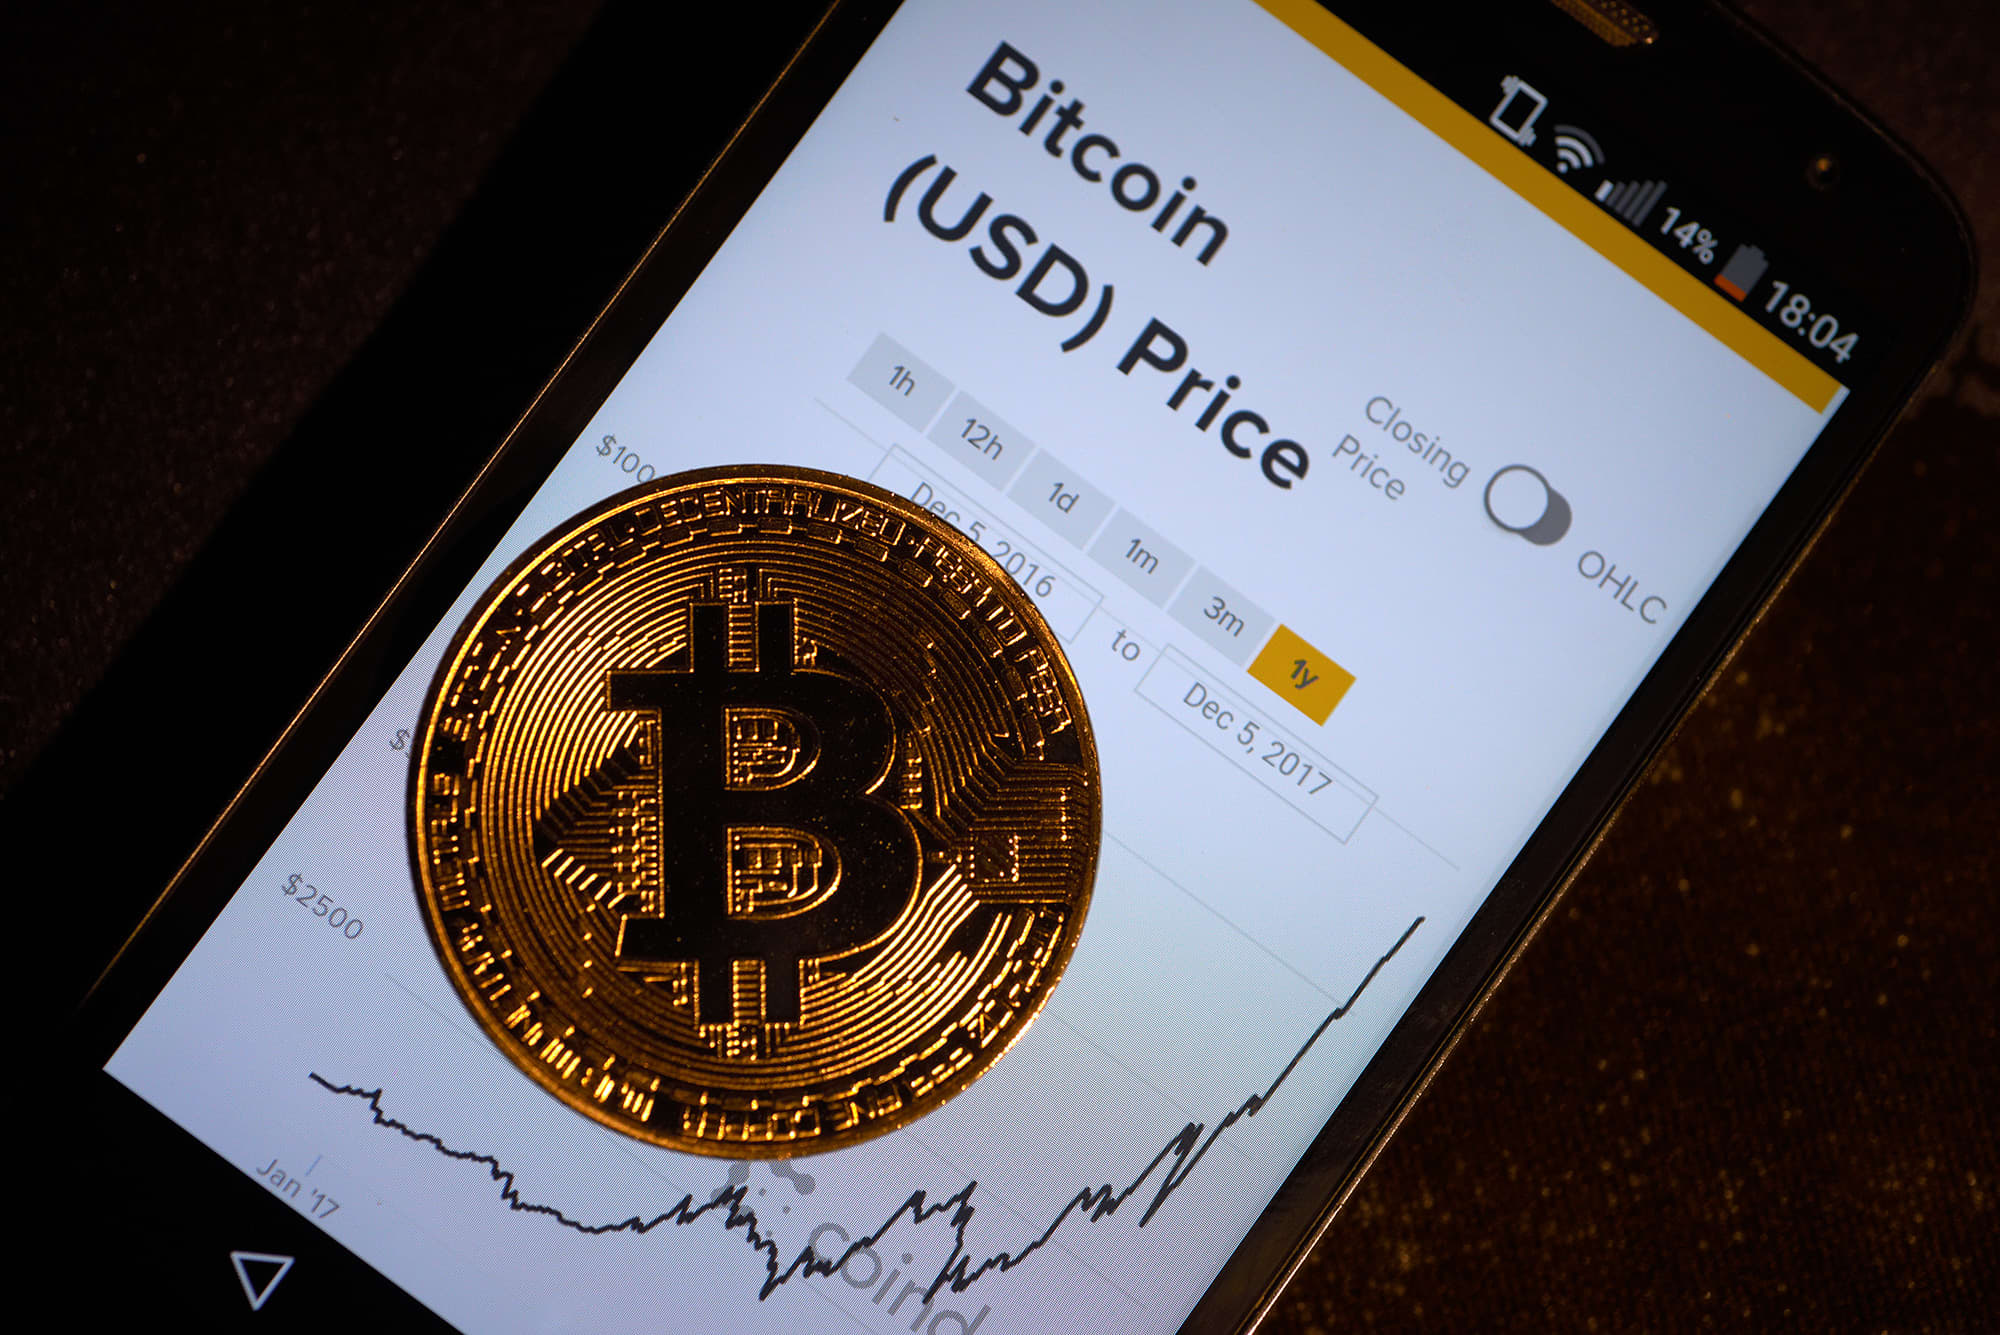 Here are 5 theories for the Bitcoin price spike